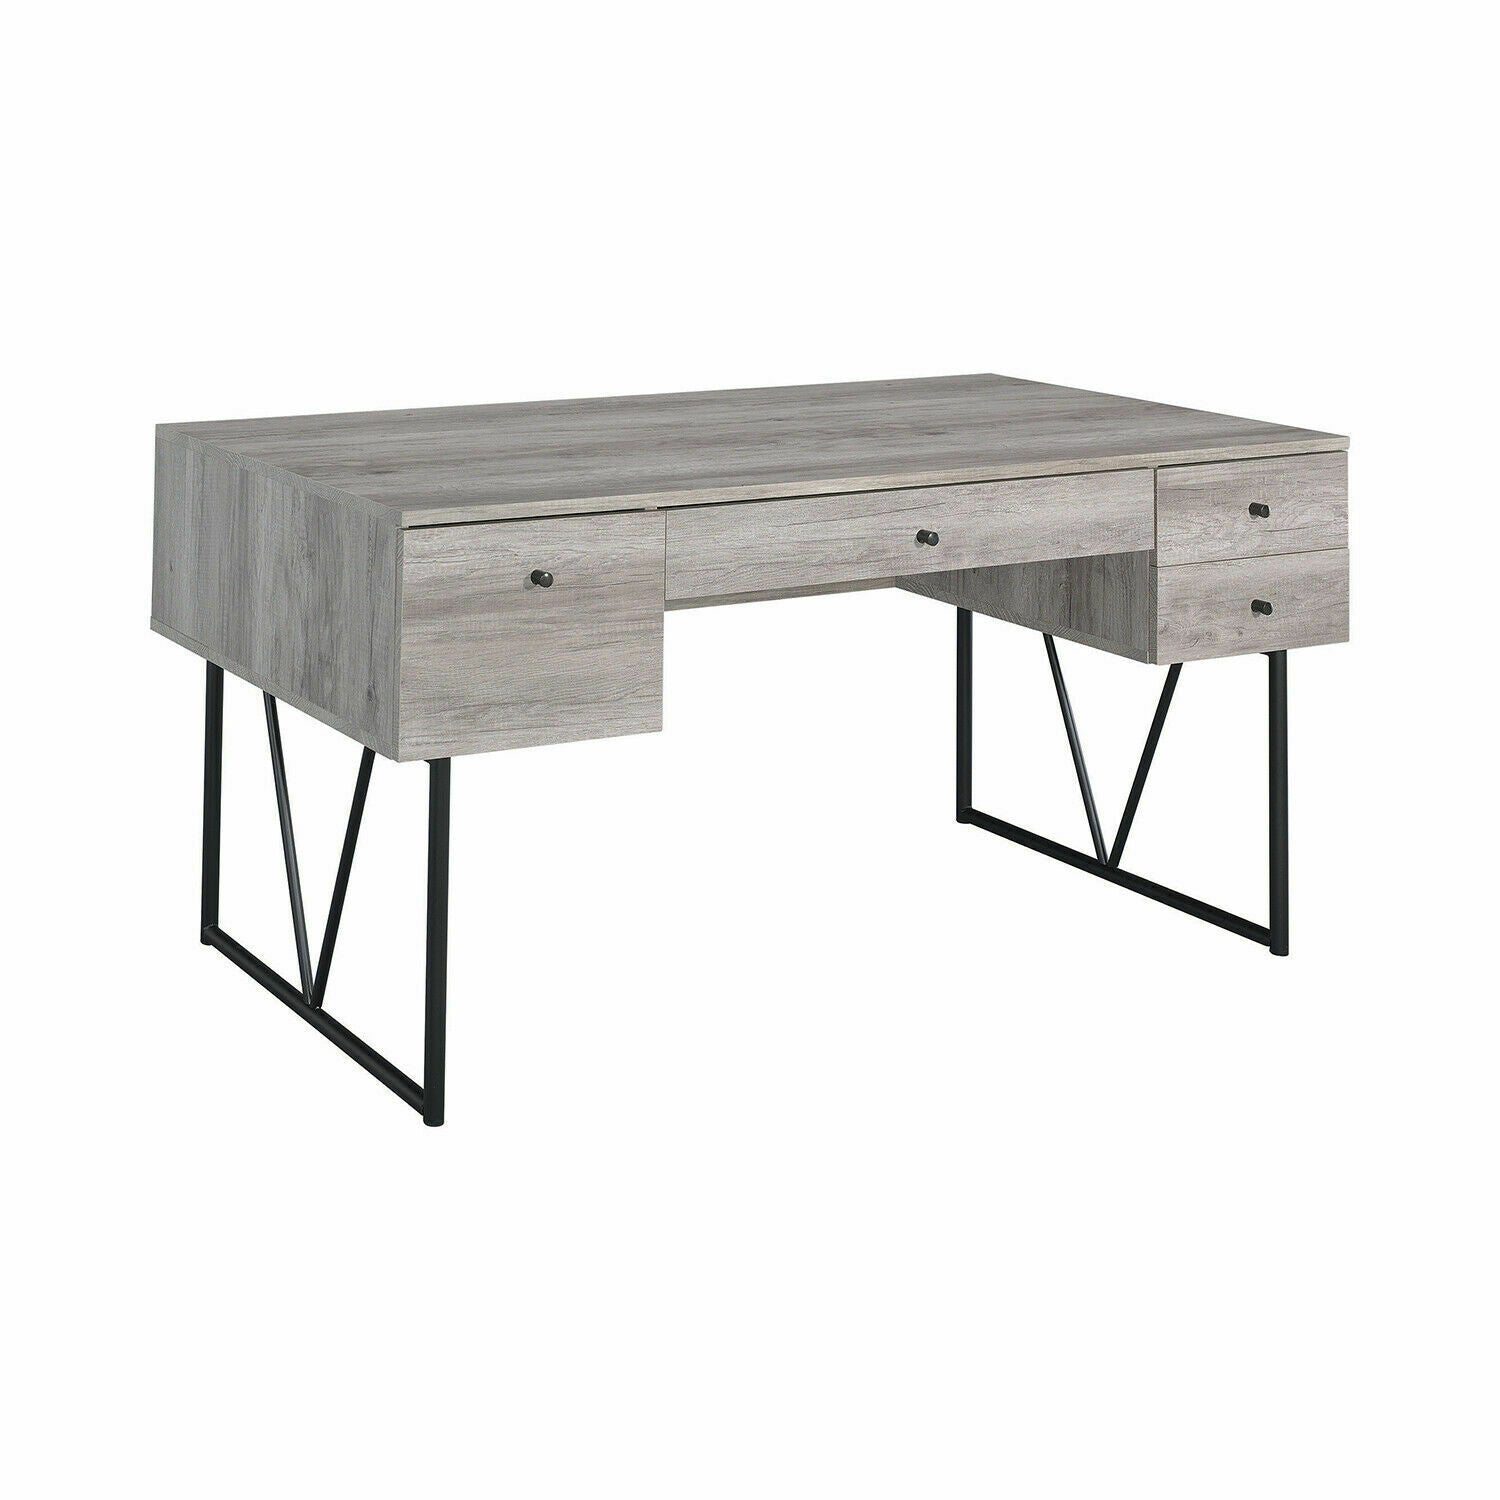 4-Drawer Analiese Industrial Grey Driftwood Home office Writing Desk